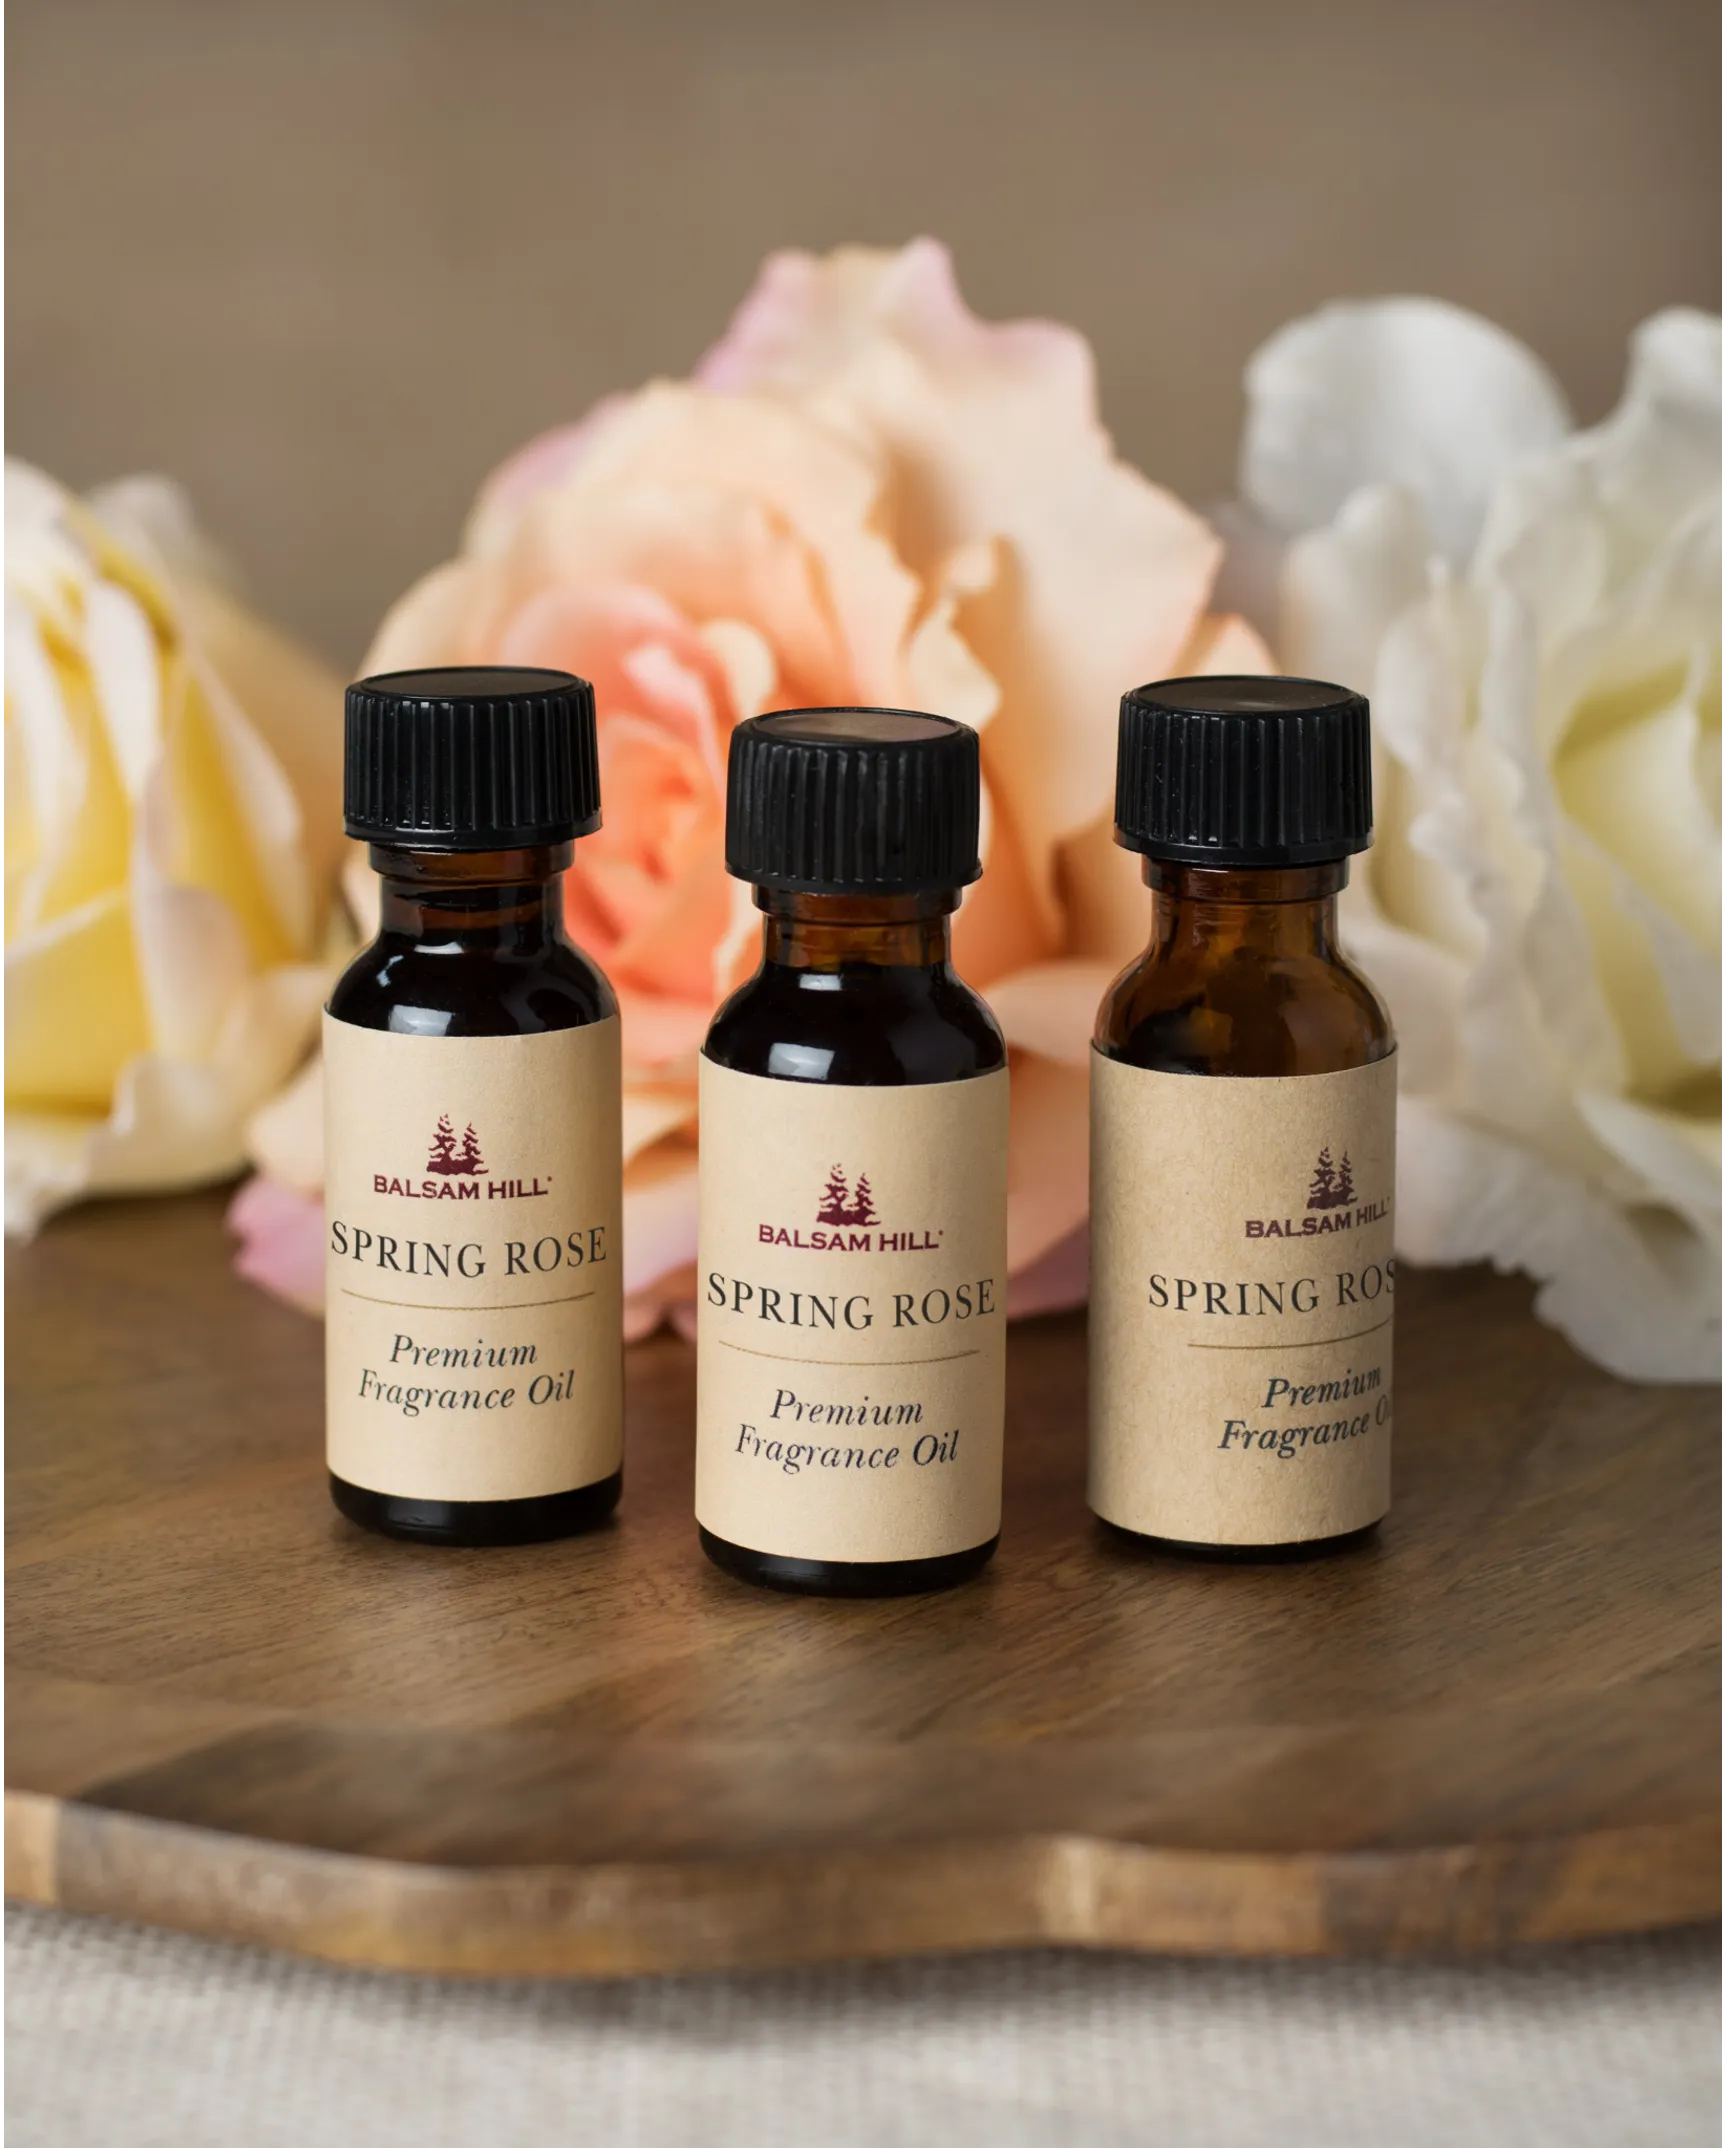 Winter Essential Oil Set of 6 Fragrance Oils - Christmas Wreath Pine,  Vanilla, Peppermint, Cinnamon, Sugar Cookie, and Gingerbread by Good Essential  Oils - 5ml Bottles 